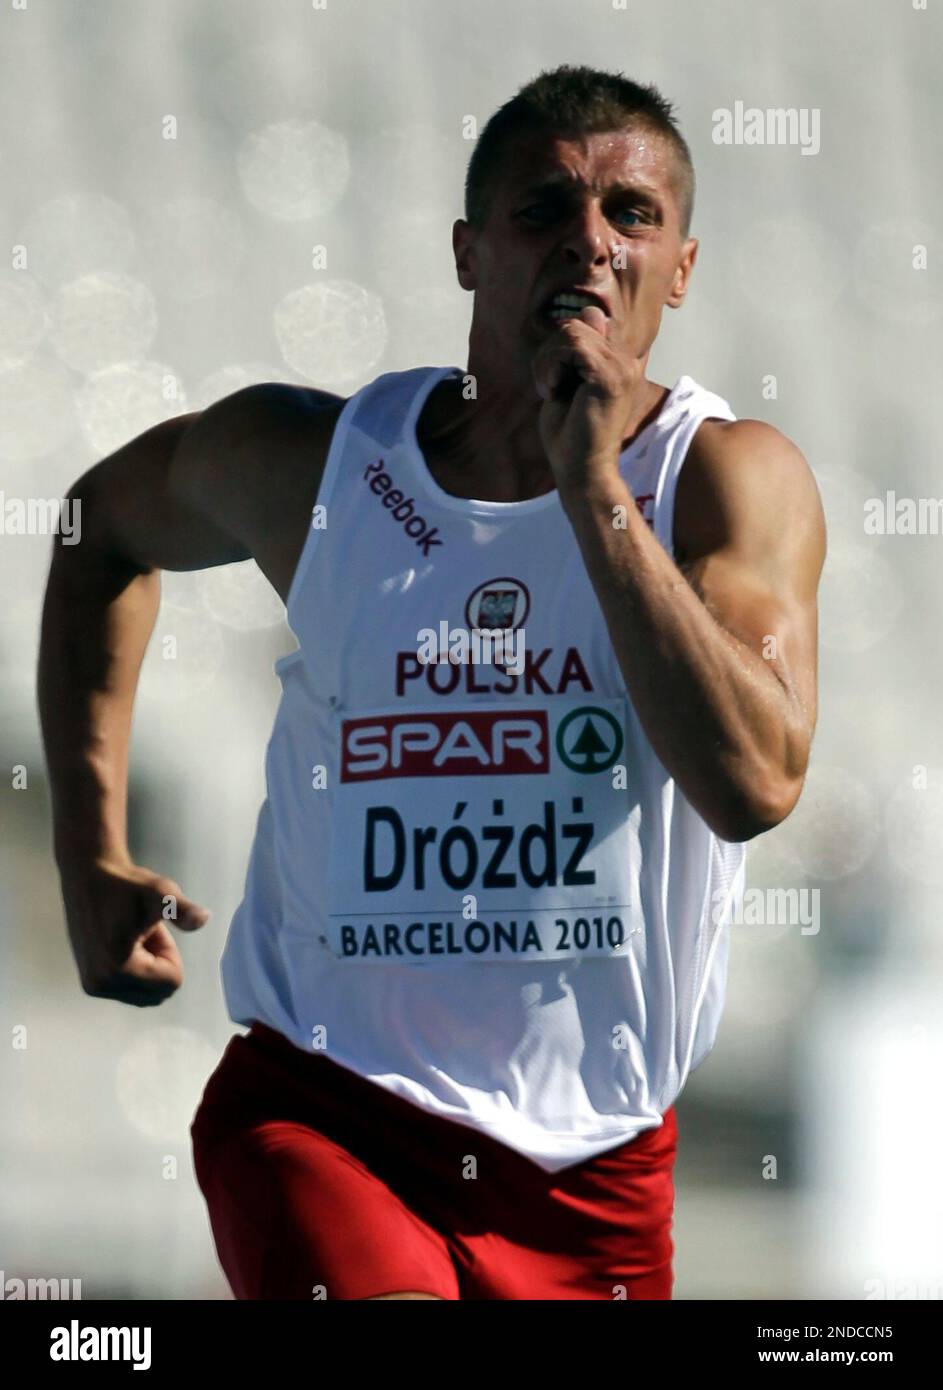 Poland's Marcin Drozdz competes in a Men's 100m Decathlon heat, during the  European Athletics Championships, in Barcelona, Spain, Tuesday, July 28,  2009. (AP Photo/Anja Niedringhaus Stock Photo - Alamy